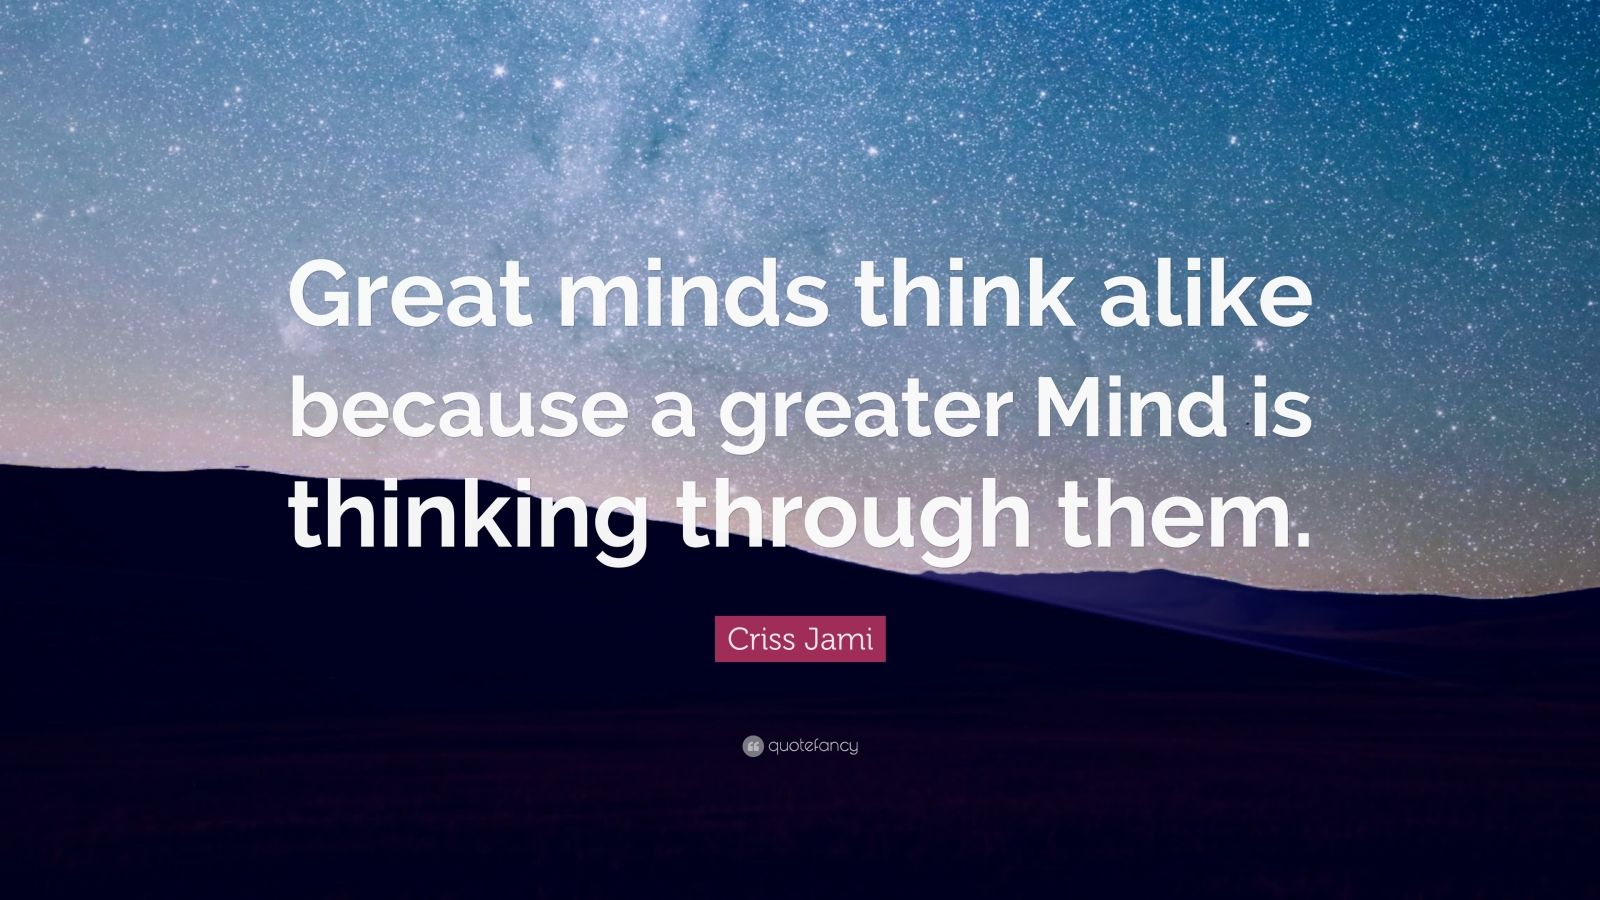 Criss Jami Quote: “Great minds think alike because a greater Mind is